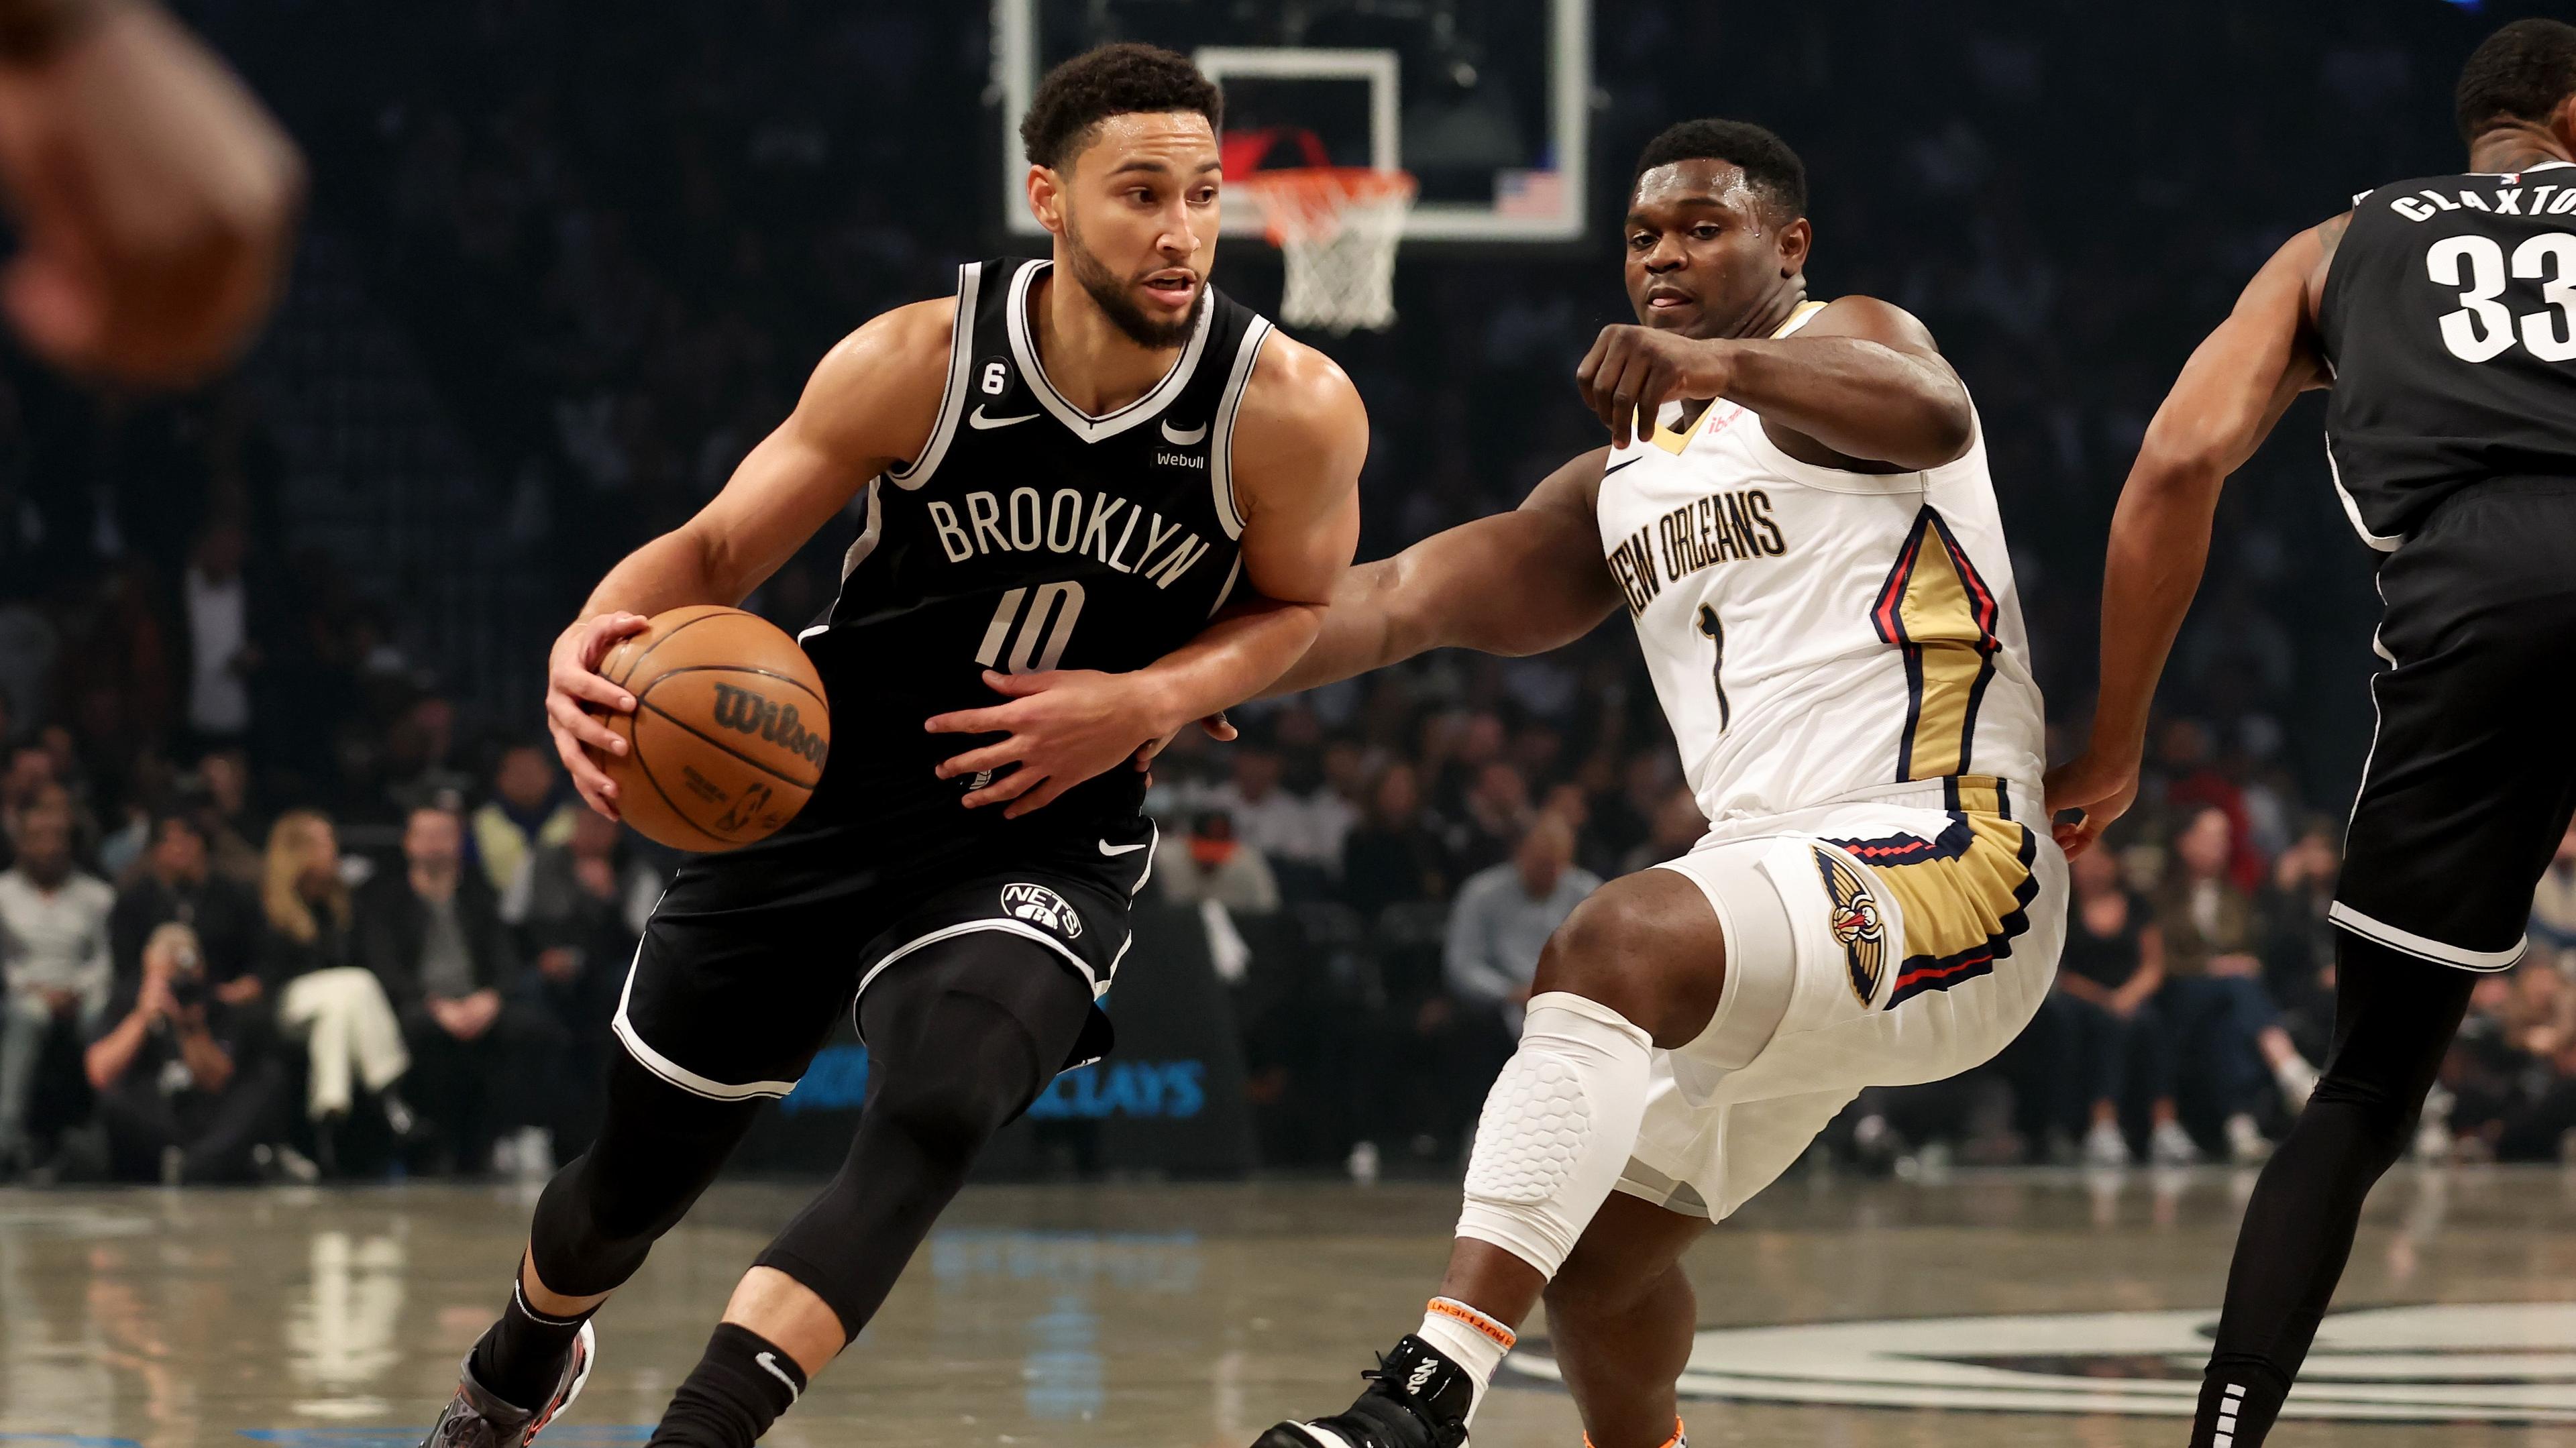 Oct 19, 2022; Brooklyn, New York, USA; Brooklyn Nets guard Ben Simmons (10) controls the ball against New Orleans Pelicans forward Zion Williamson (1) during the first quarter at Barclays Center. Mandatory Credit: Brad Penner-USA TODAY Sports / © Brad Penner-USA TODAY Sports